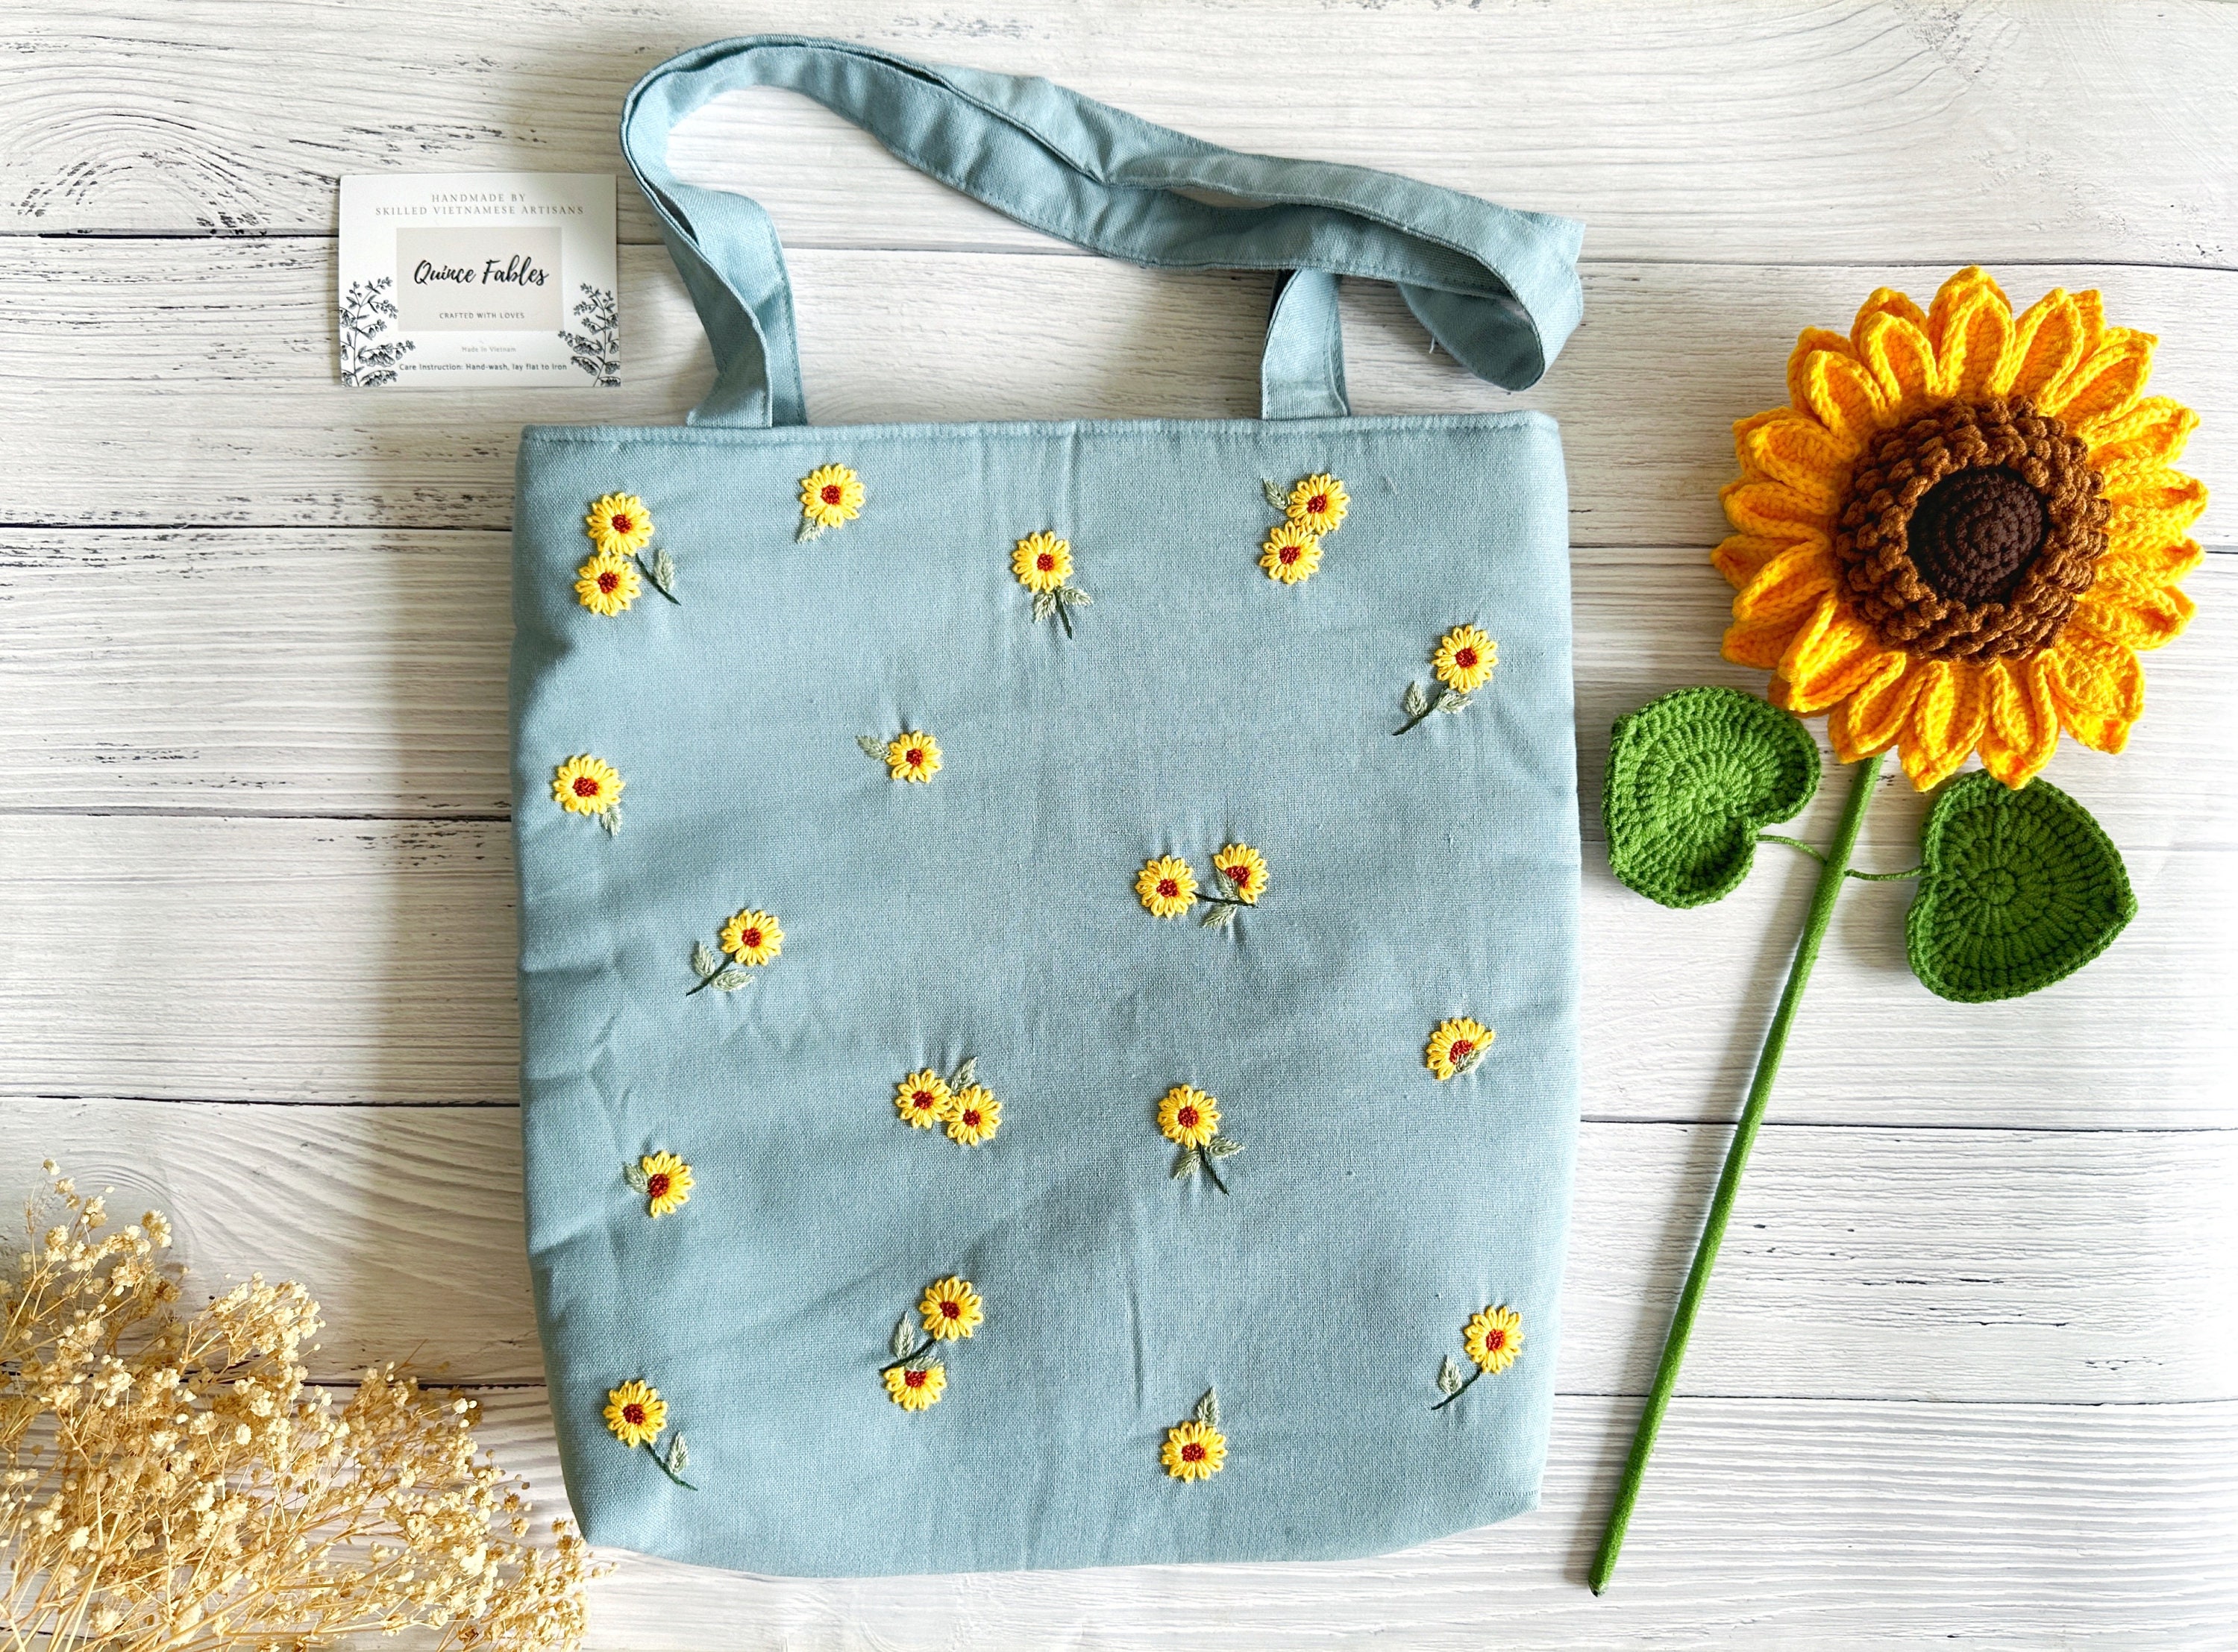 Small Daisies Embroidery Linen Tote Bag